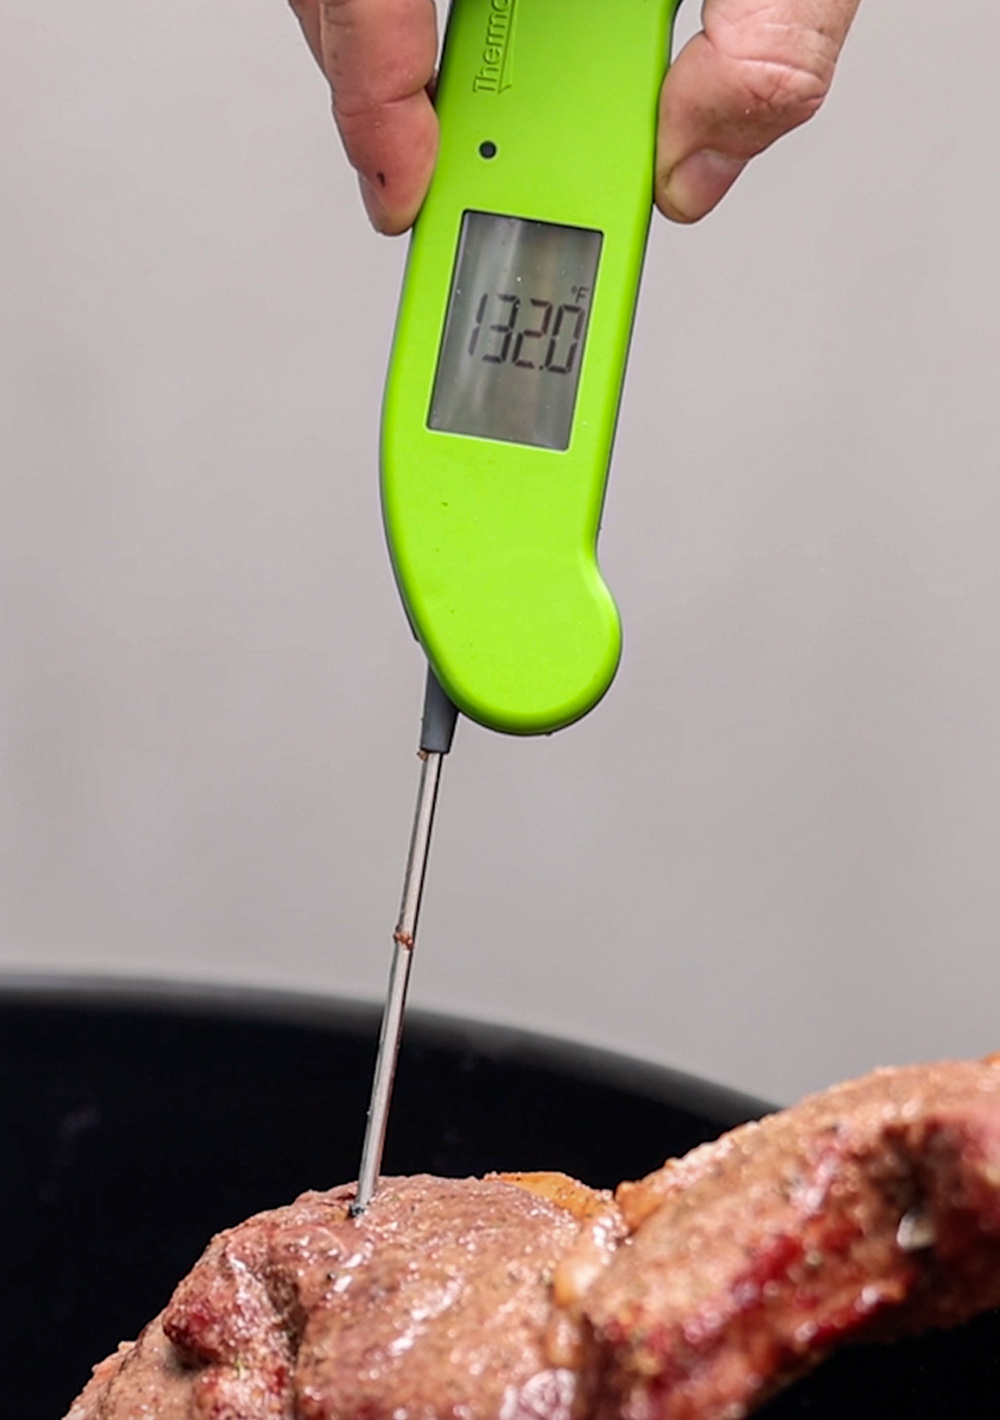 Thermapen ONE deal: Get this great meat thermometer for 15% off